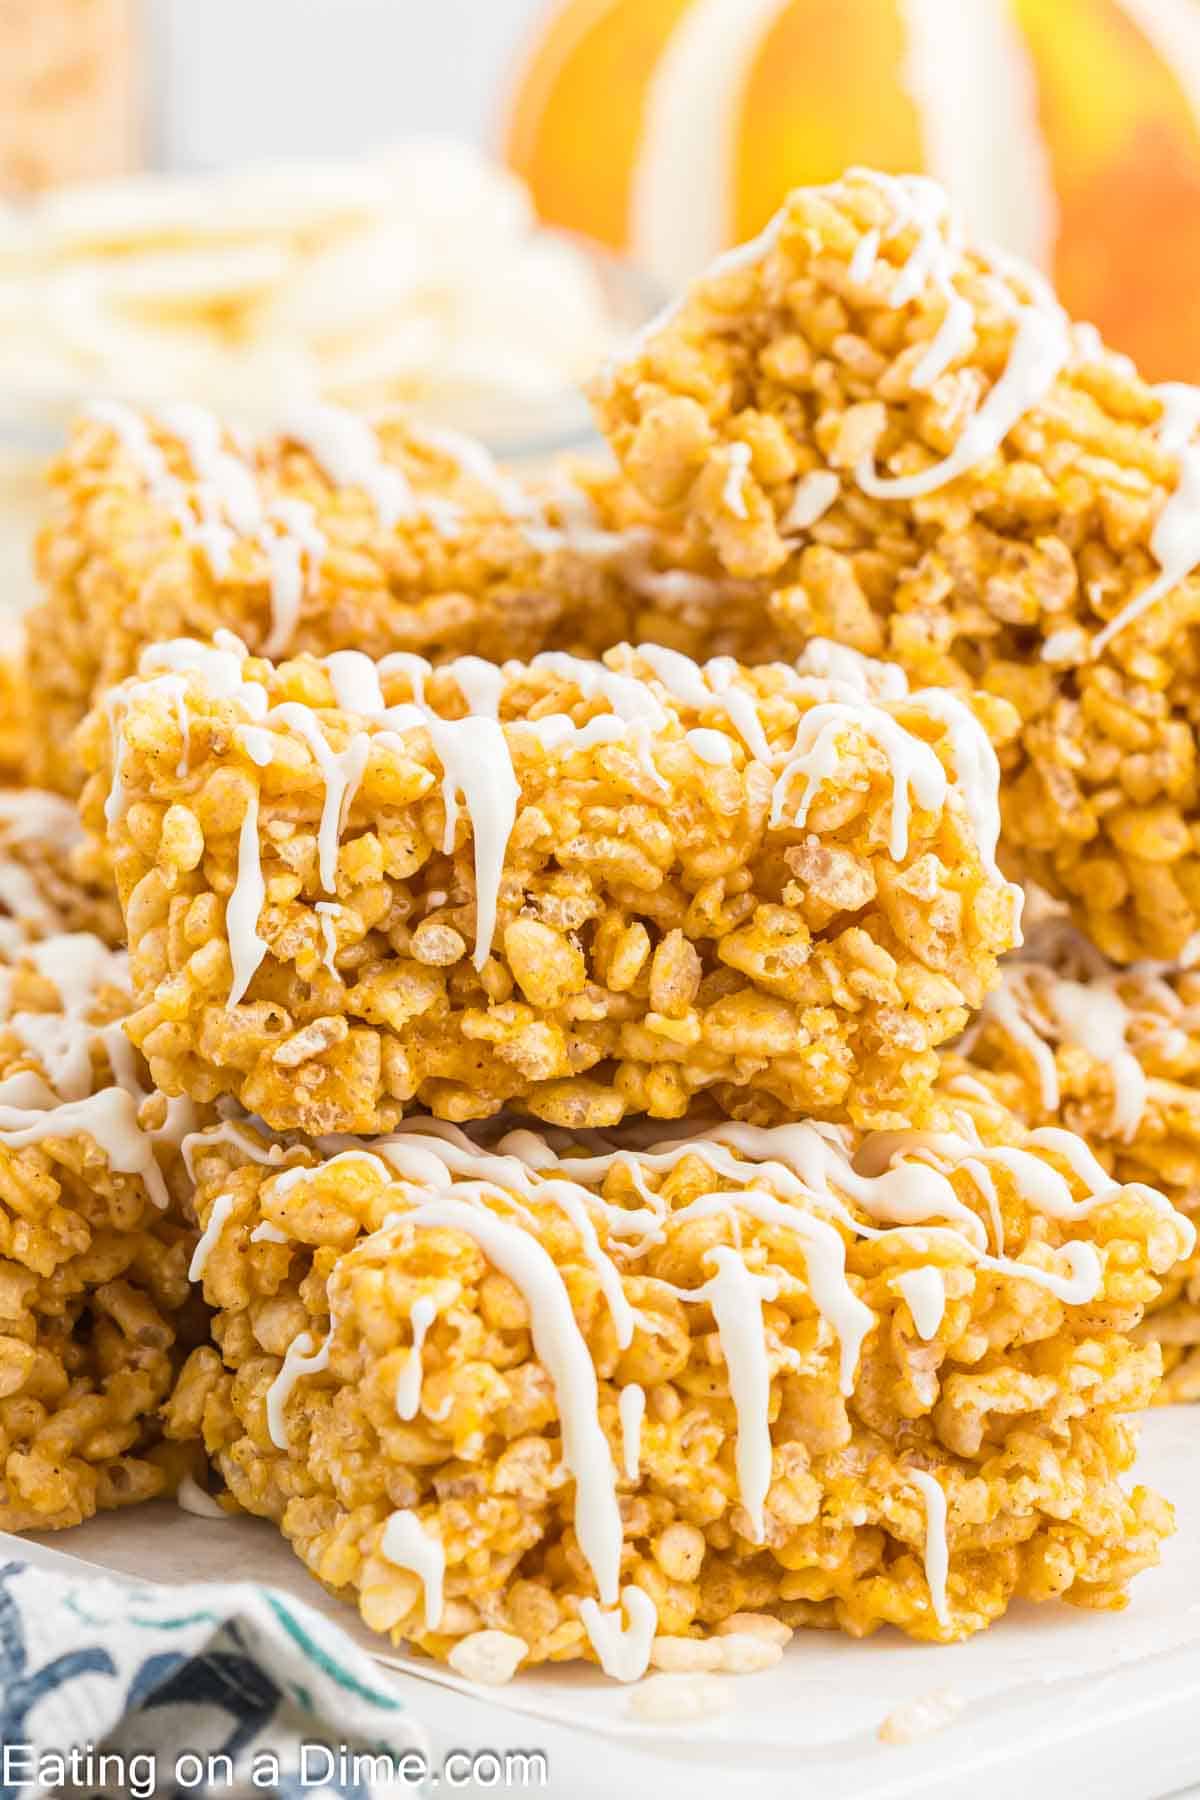 A close-up of pumpkin rice krispie treats stacked on a plate, drizzled with white icing. The treats are golden brown and textured with puffed rice, and a blurred background shows hints of oranges and other food items.